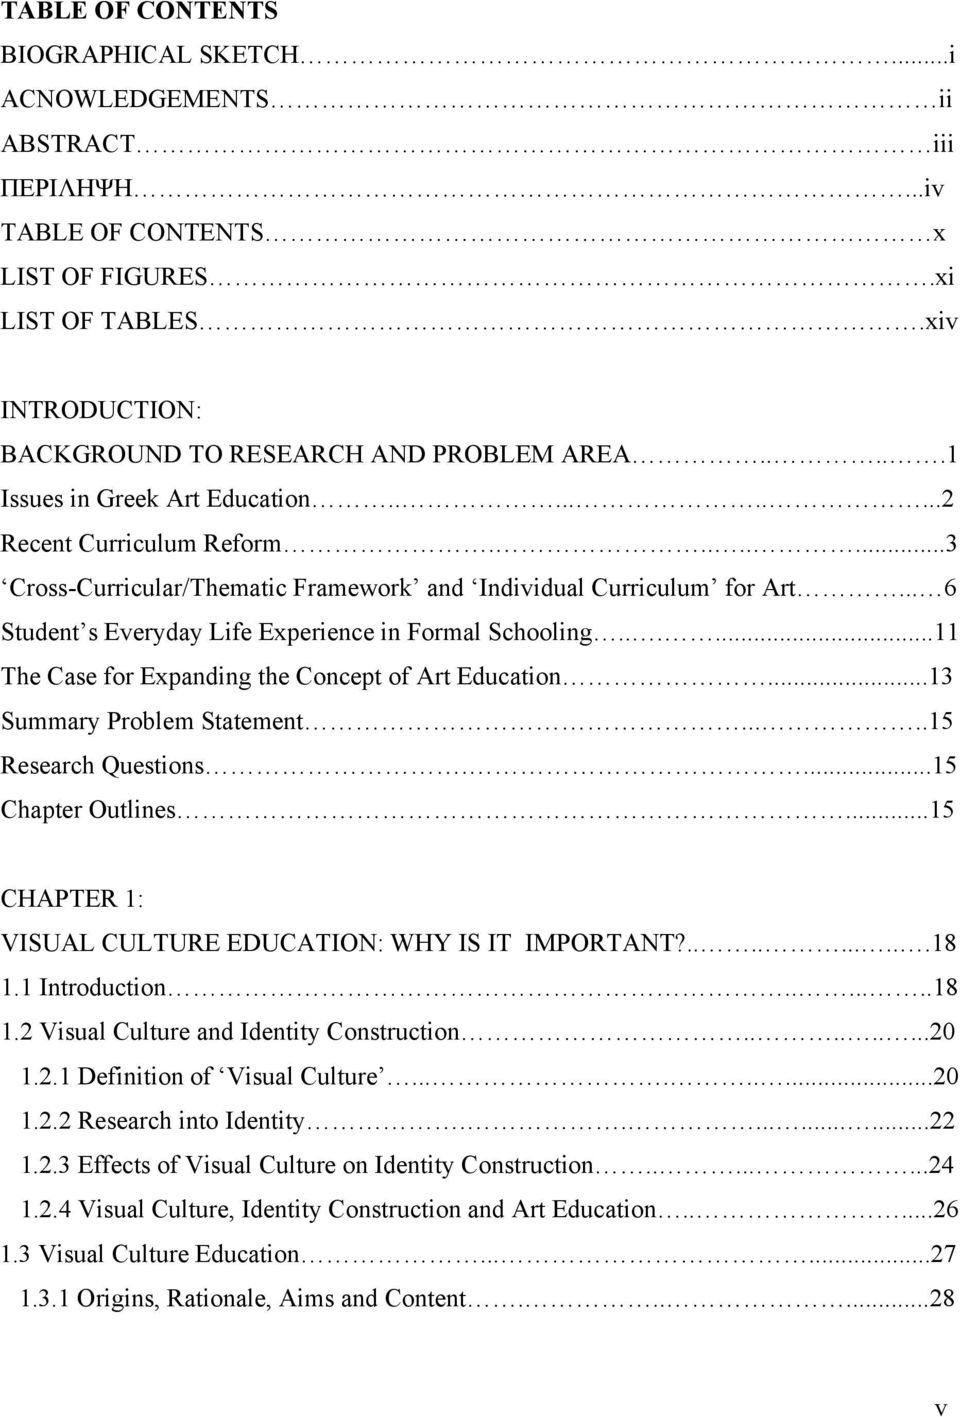 .. 6 Student s Everyday Life Experience in Formal Schooling......11 The Case for Expanding the Concept of Art Education...13 Summary Problem Statement.....15 Research Questions....15 Chapter Outlines.